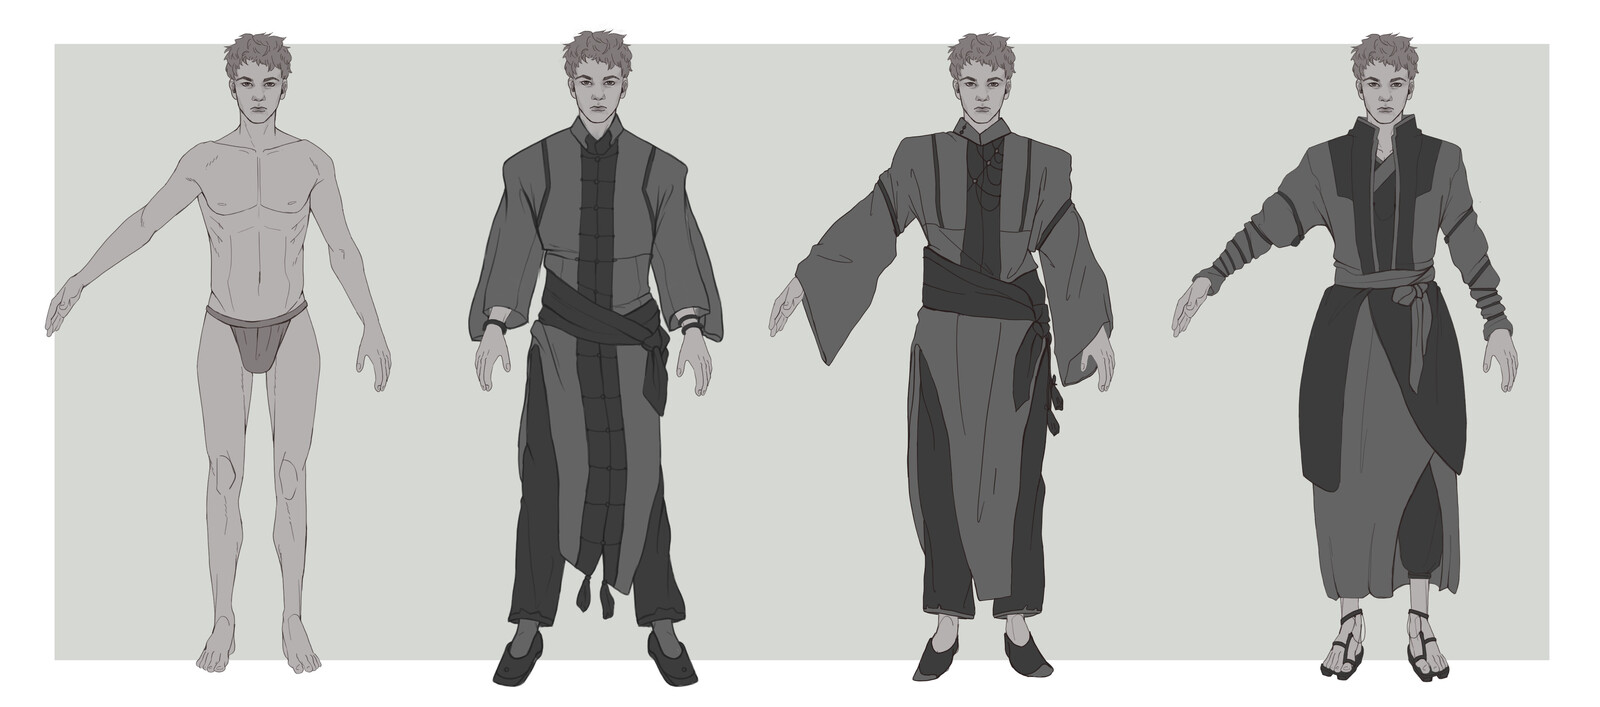 Outfit exploration and base body.